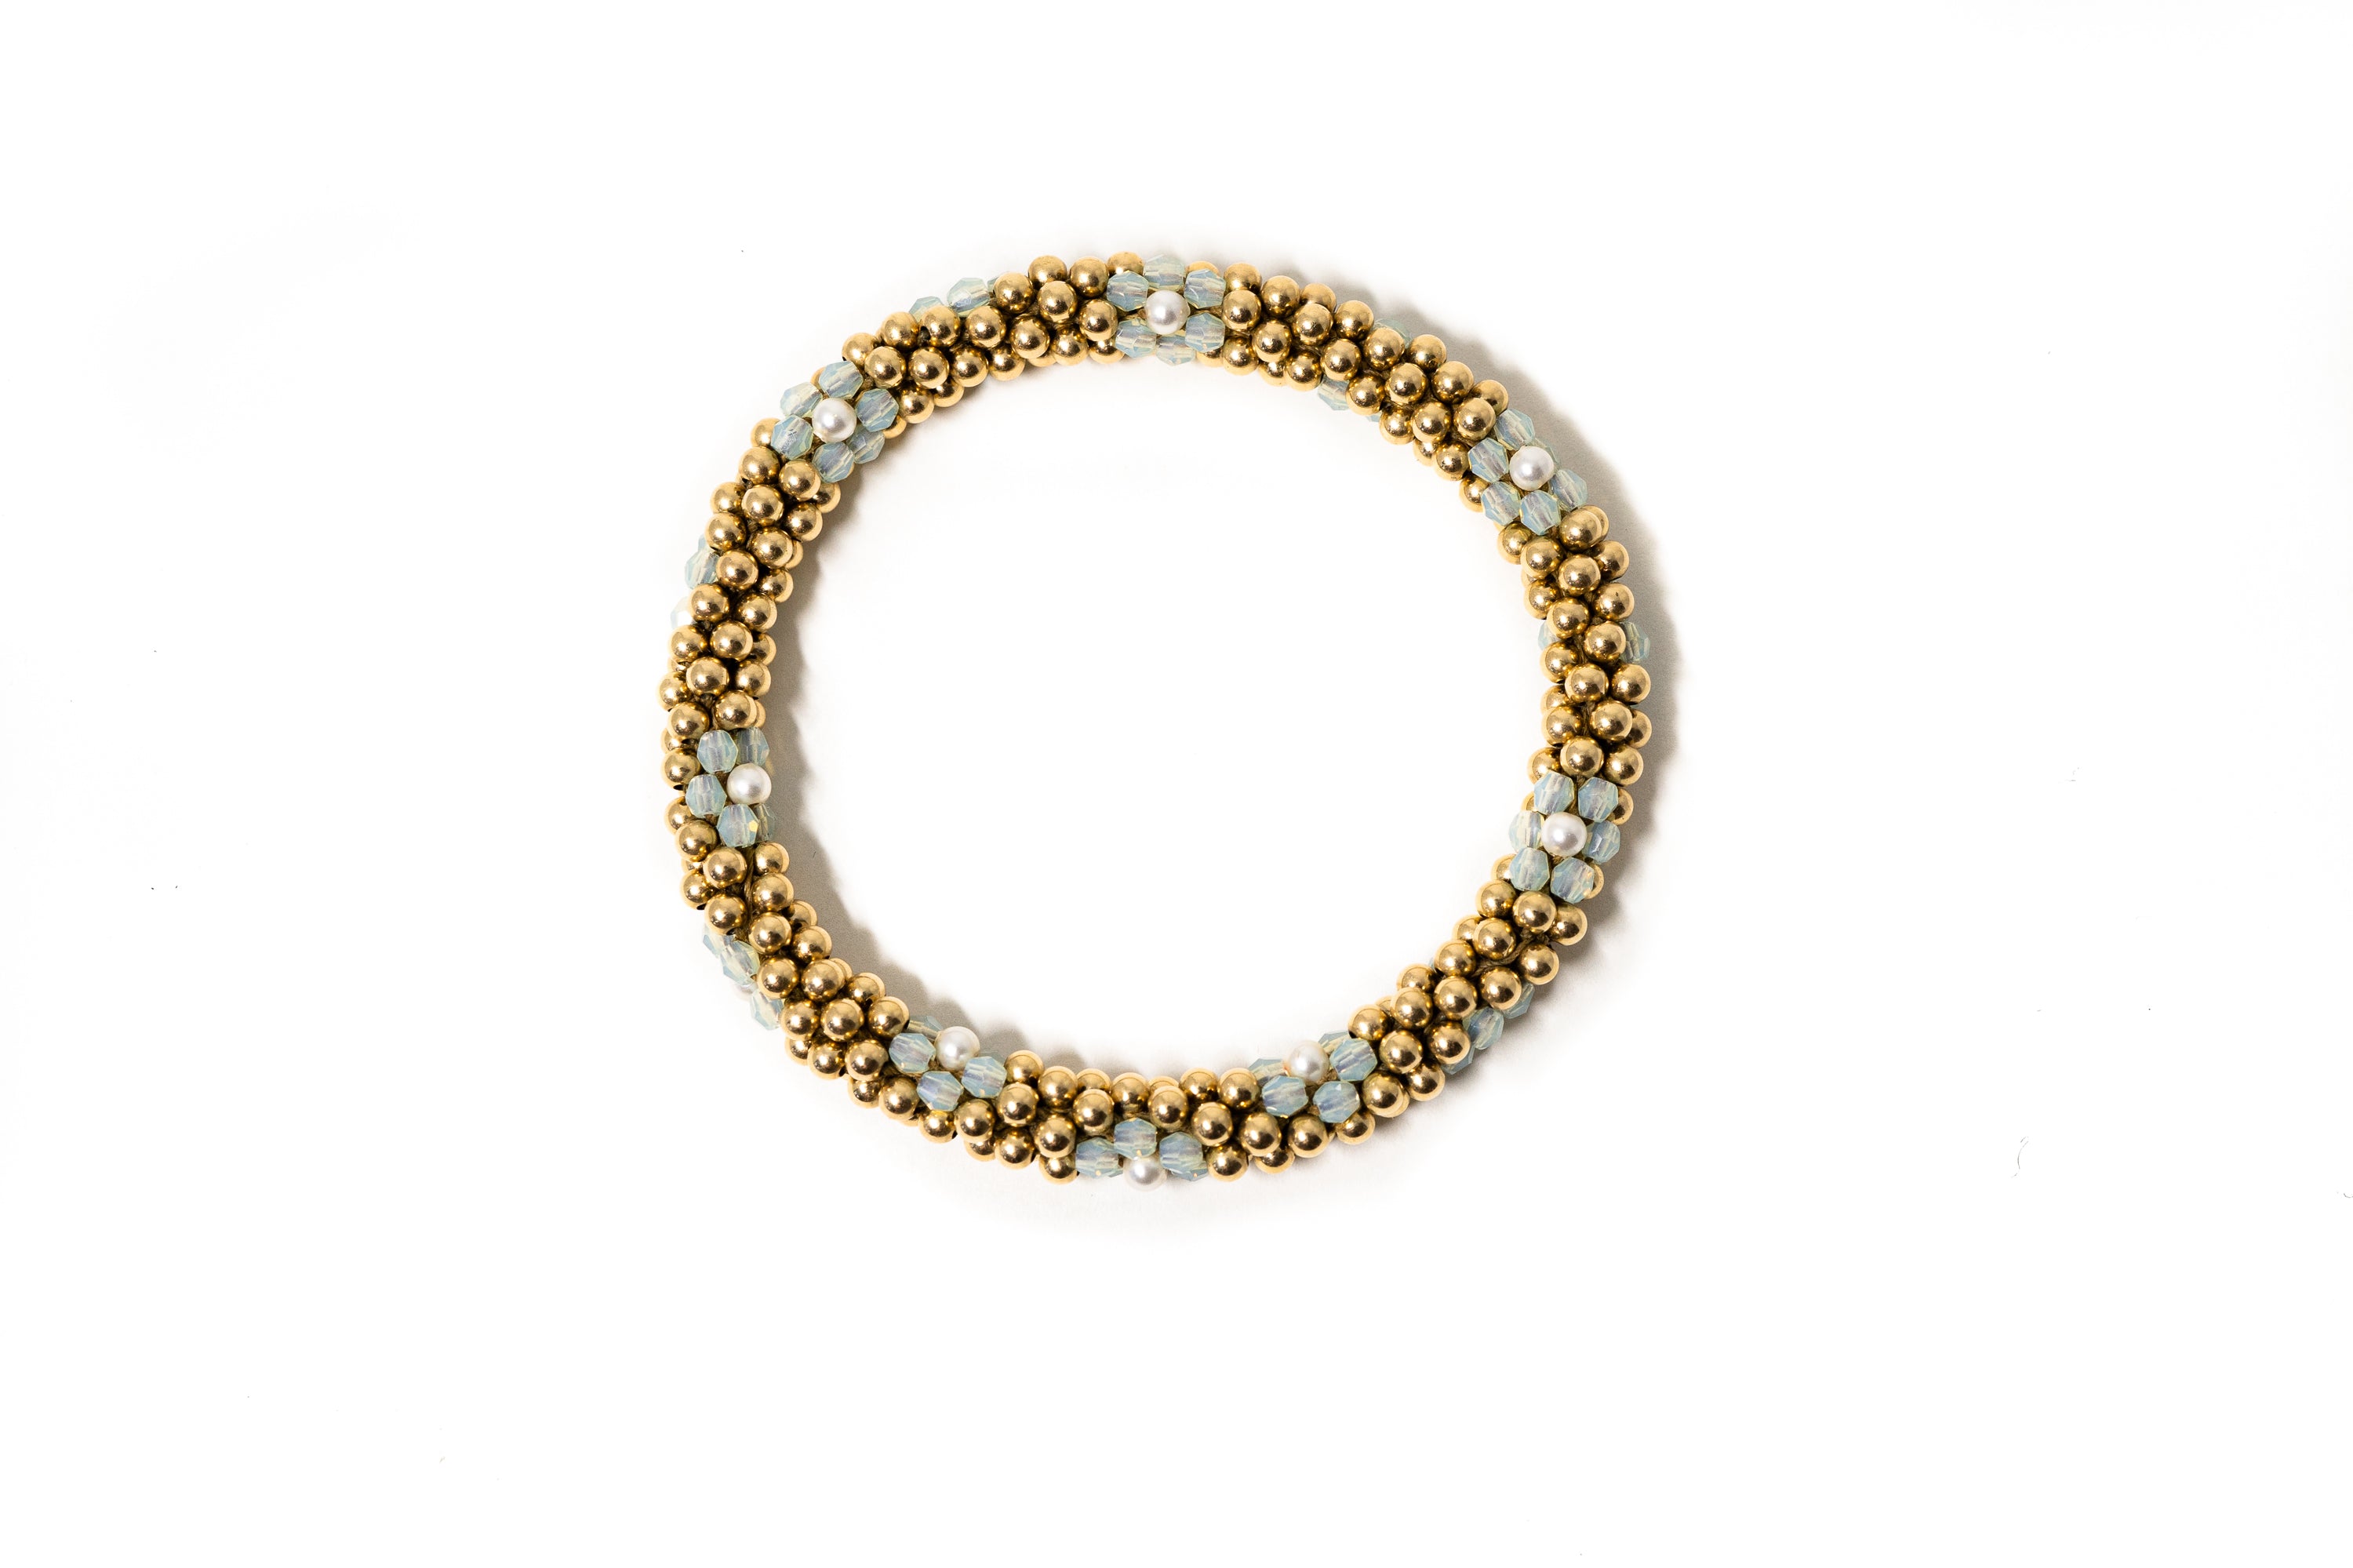 3mm Cluster Bracelets, Gold and Silver Floret Design (Click to View All)